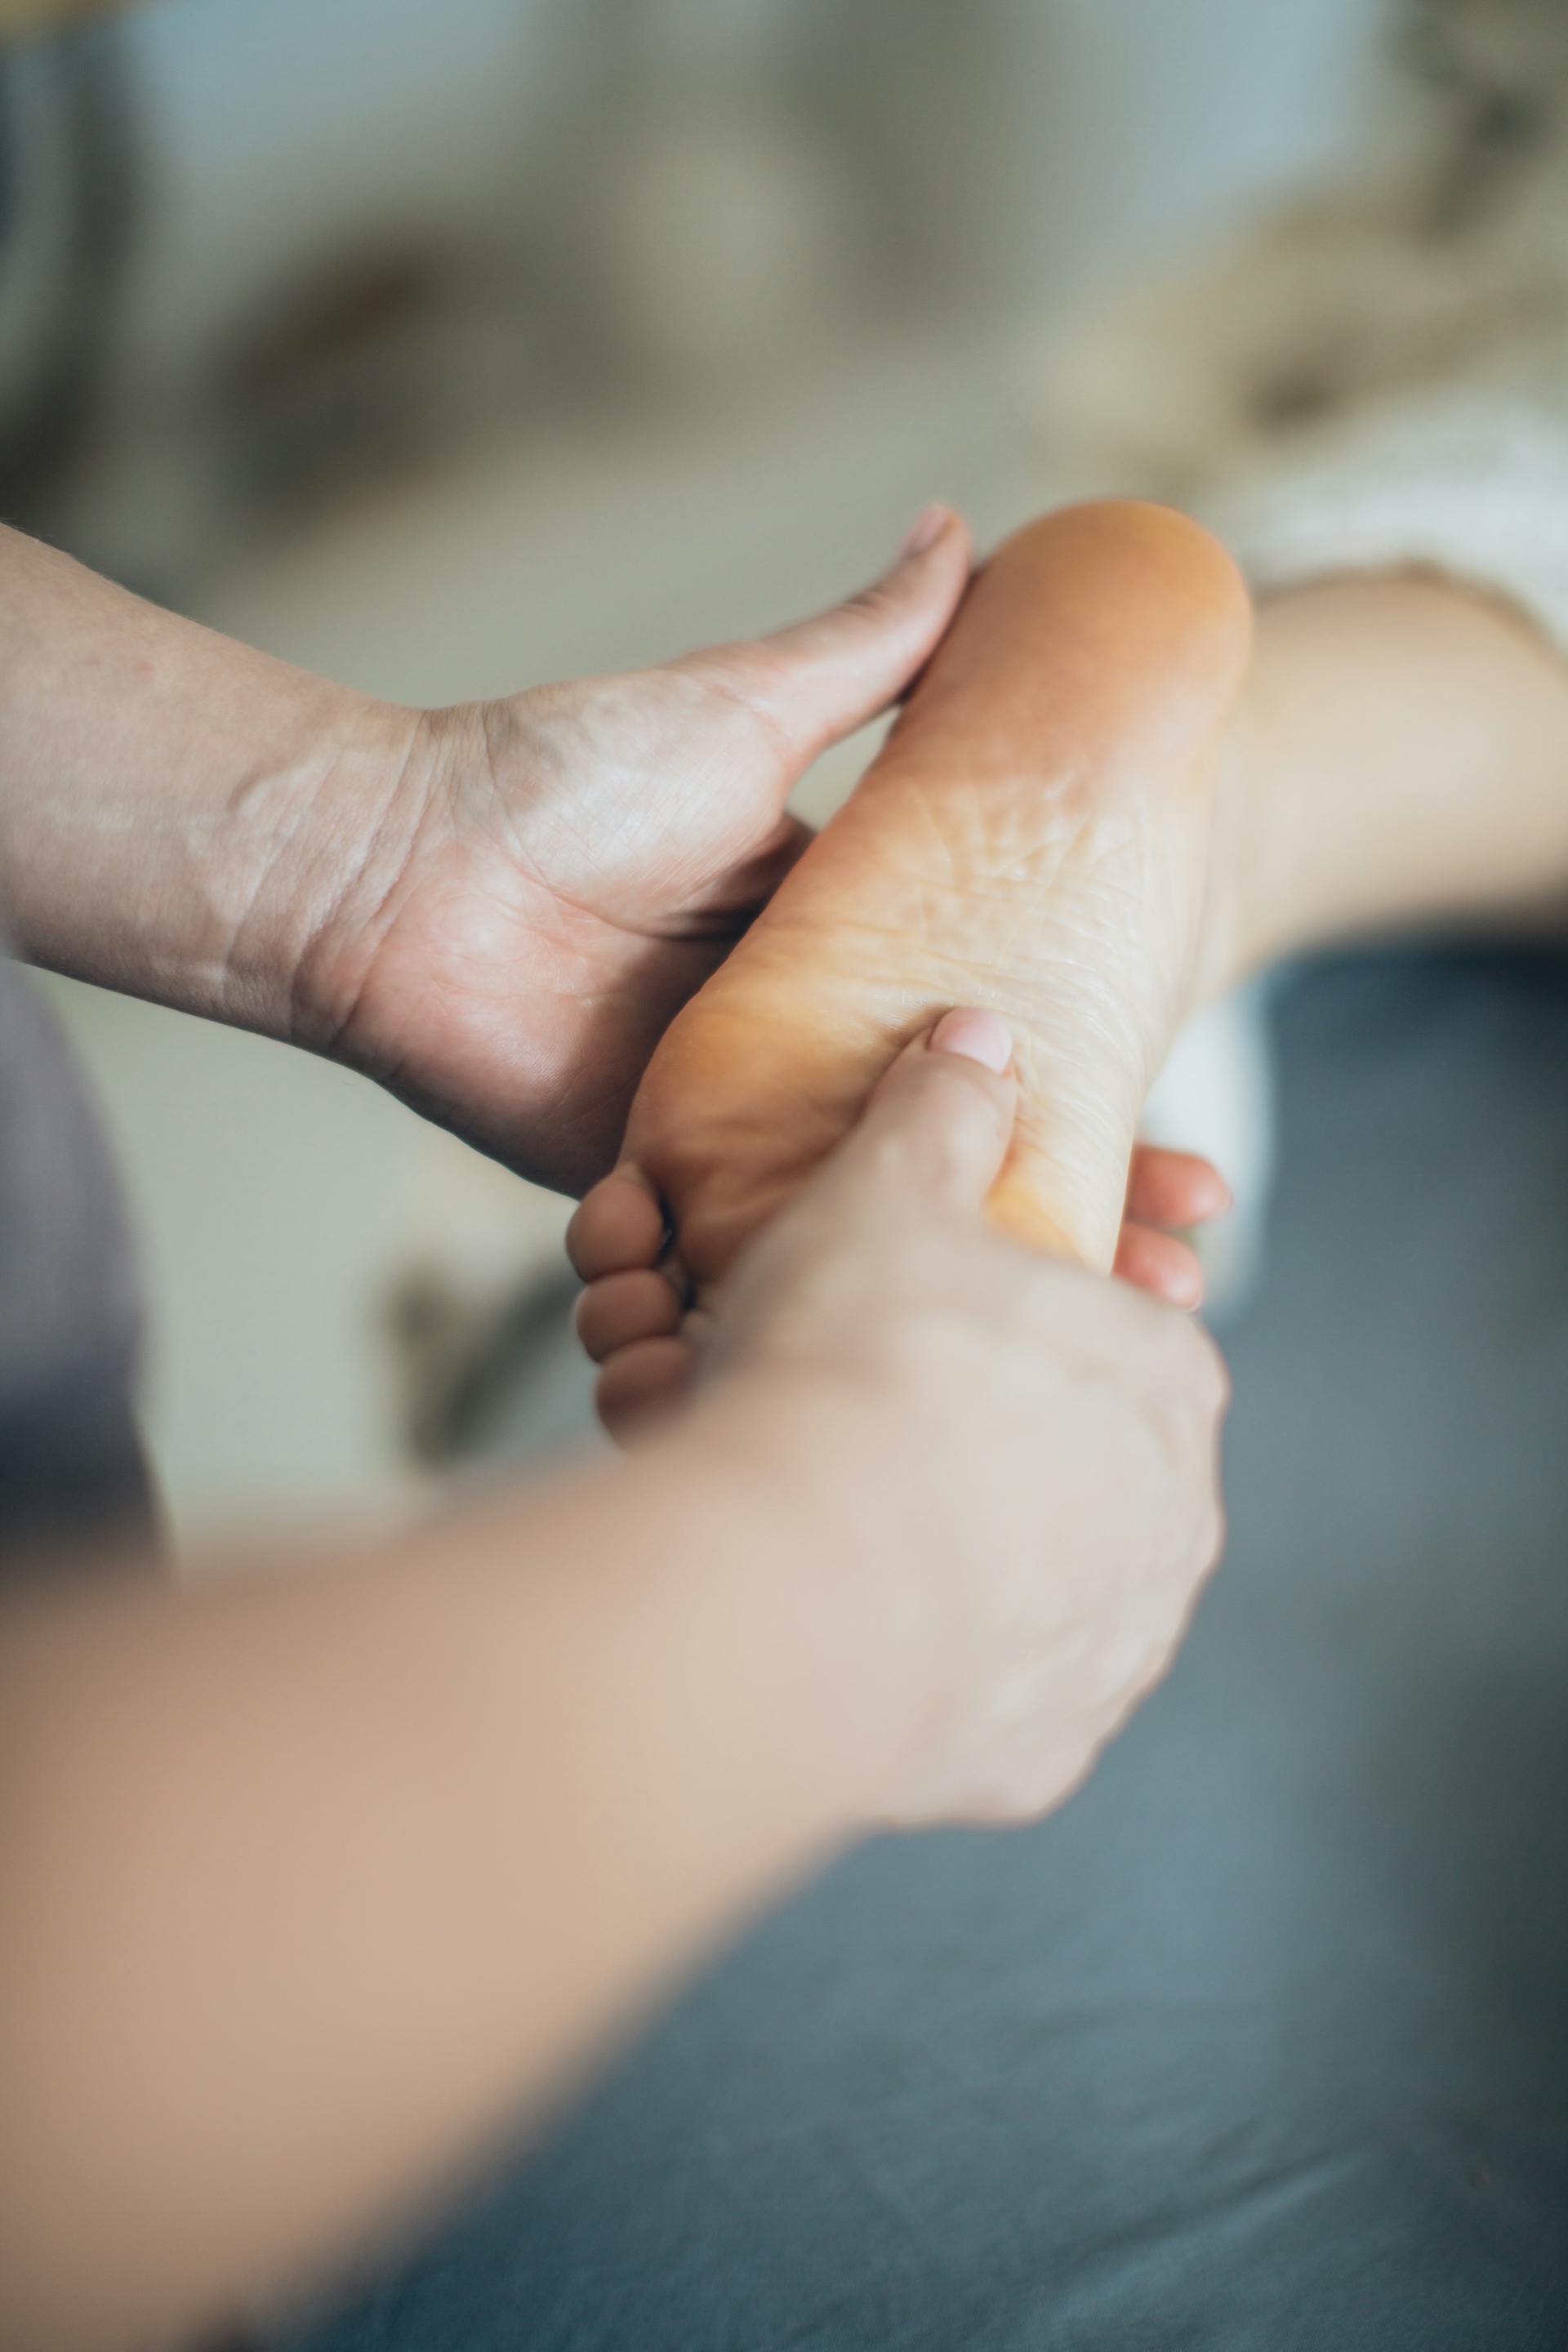 A person getting a foot massage | Source: Pexels